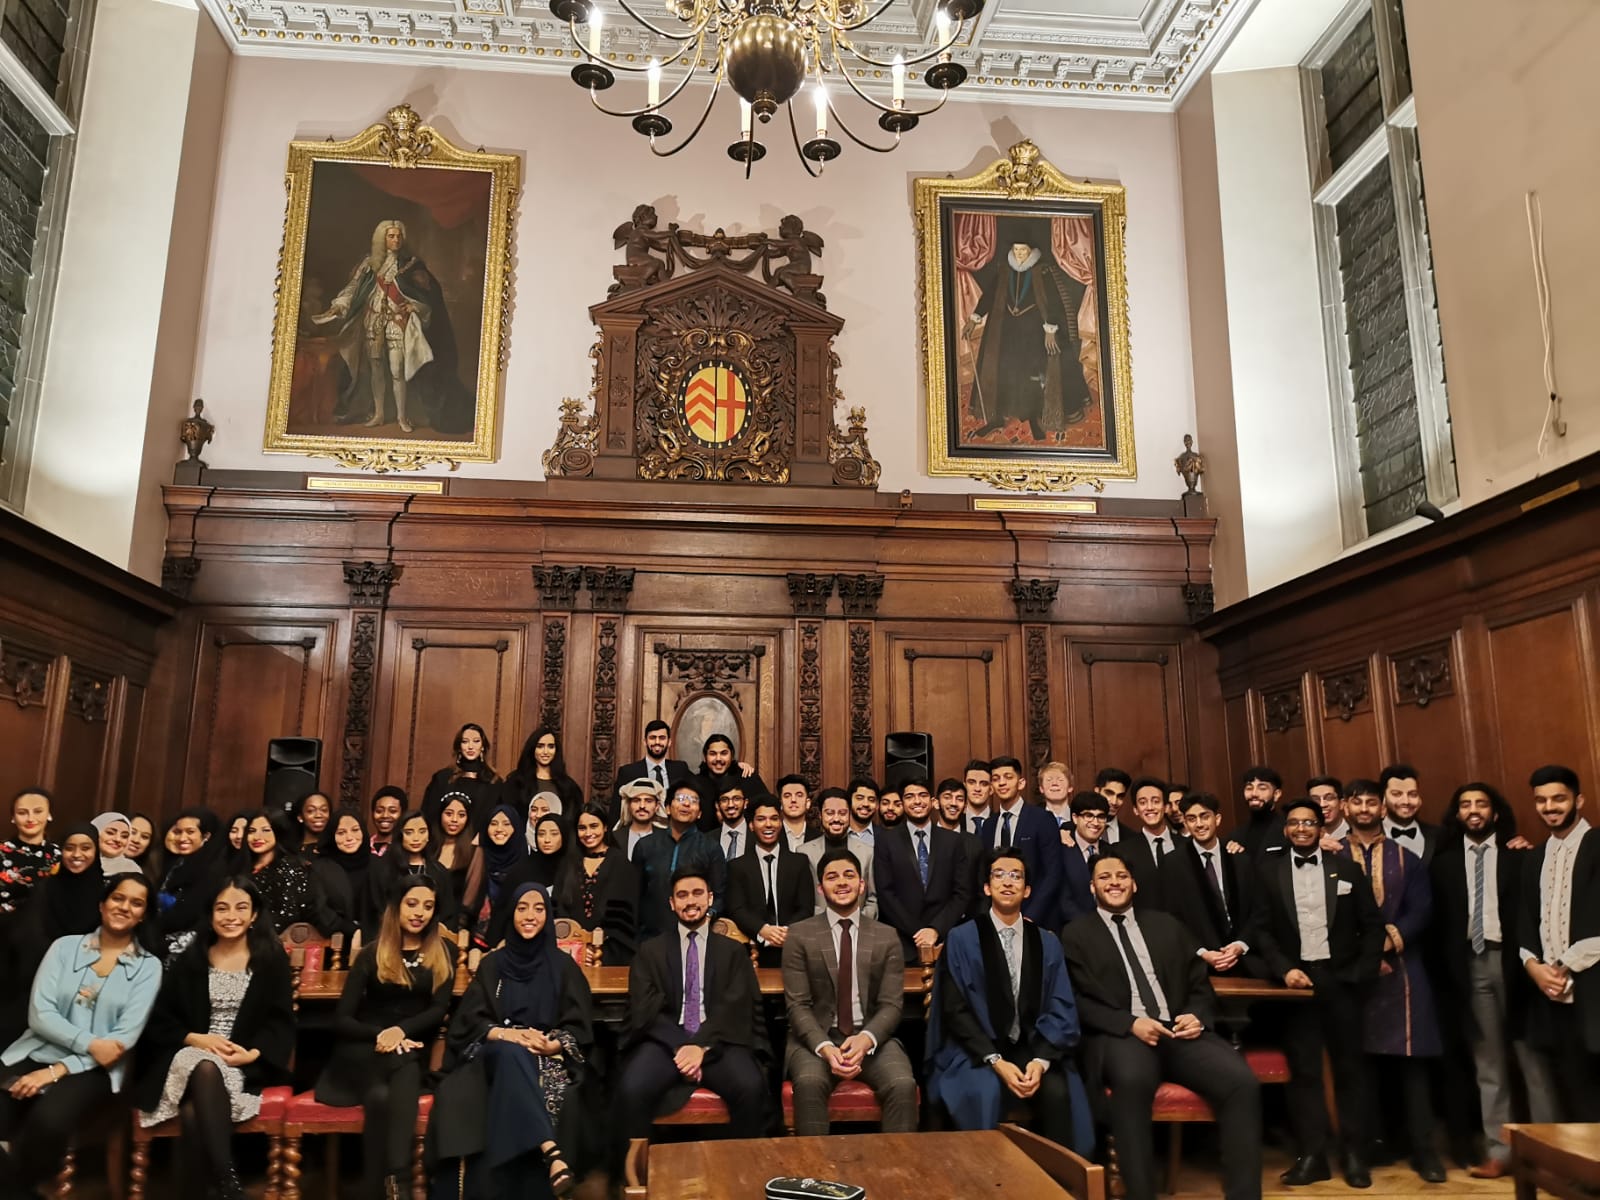 A group picture of a BanglaSoc event, with Azmaeen Zarif pictured in the front row